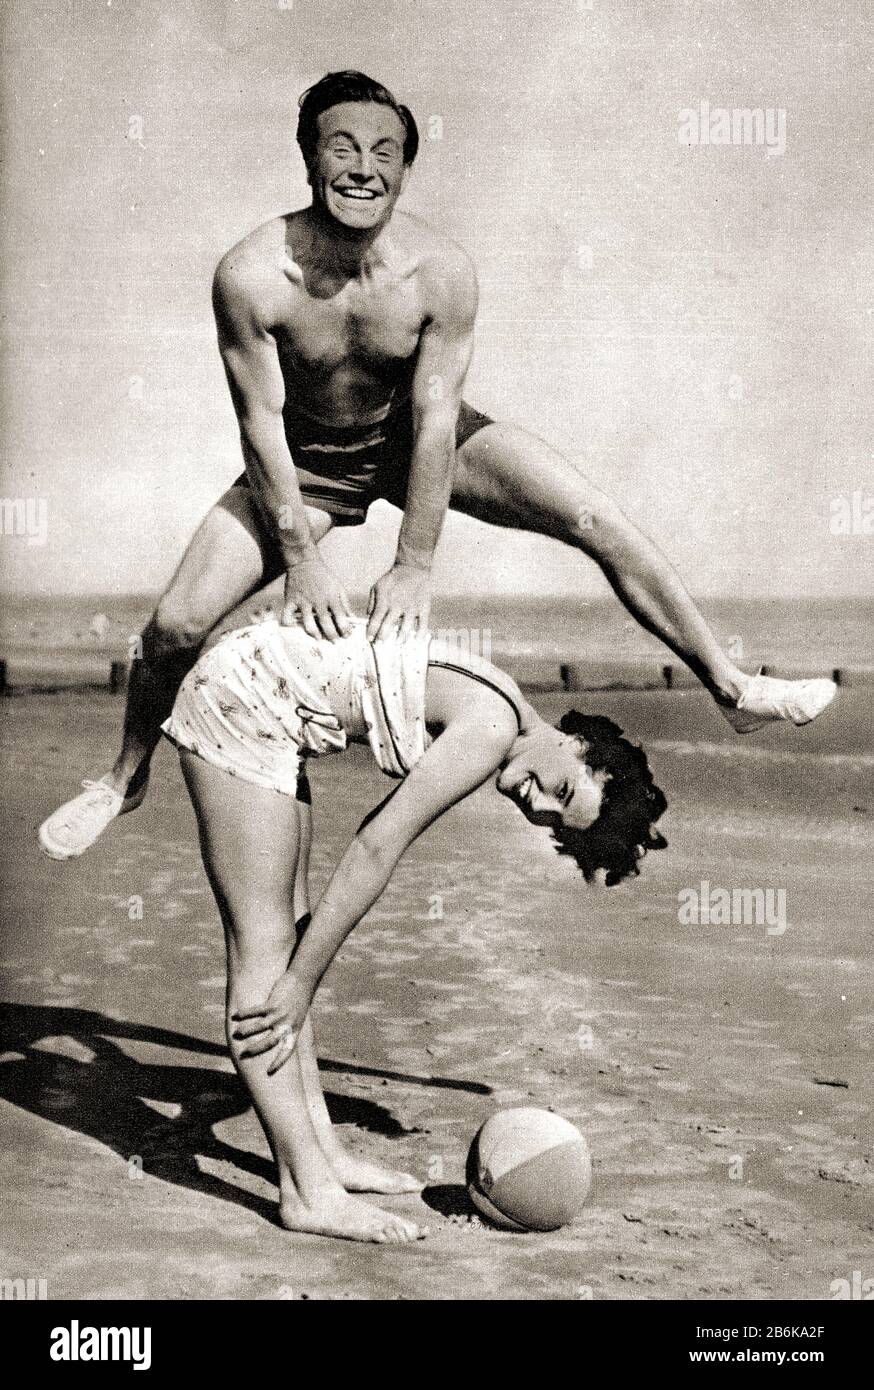 Circa 1950's photograph showing a man and a woman  playing leap frog on an English beach, wearing typical  bathing / swimming costumes of the time. Behind can be seen wooden groins which were intended to stop the sands from drifting. Stock Photo